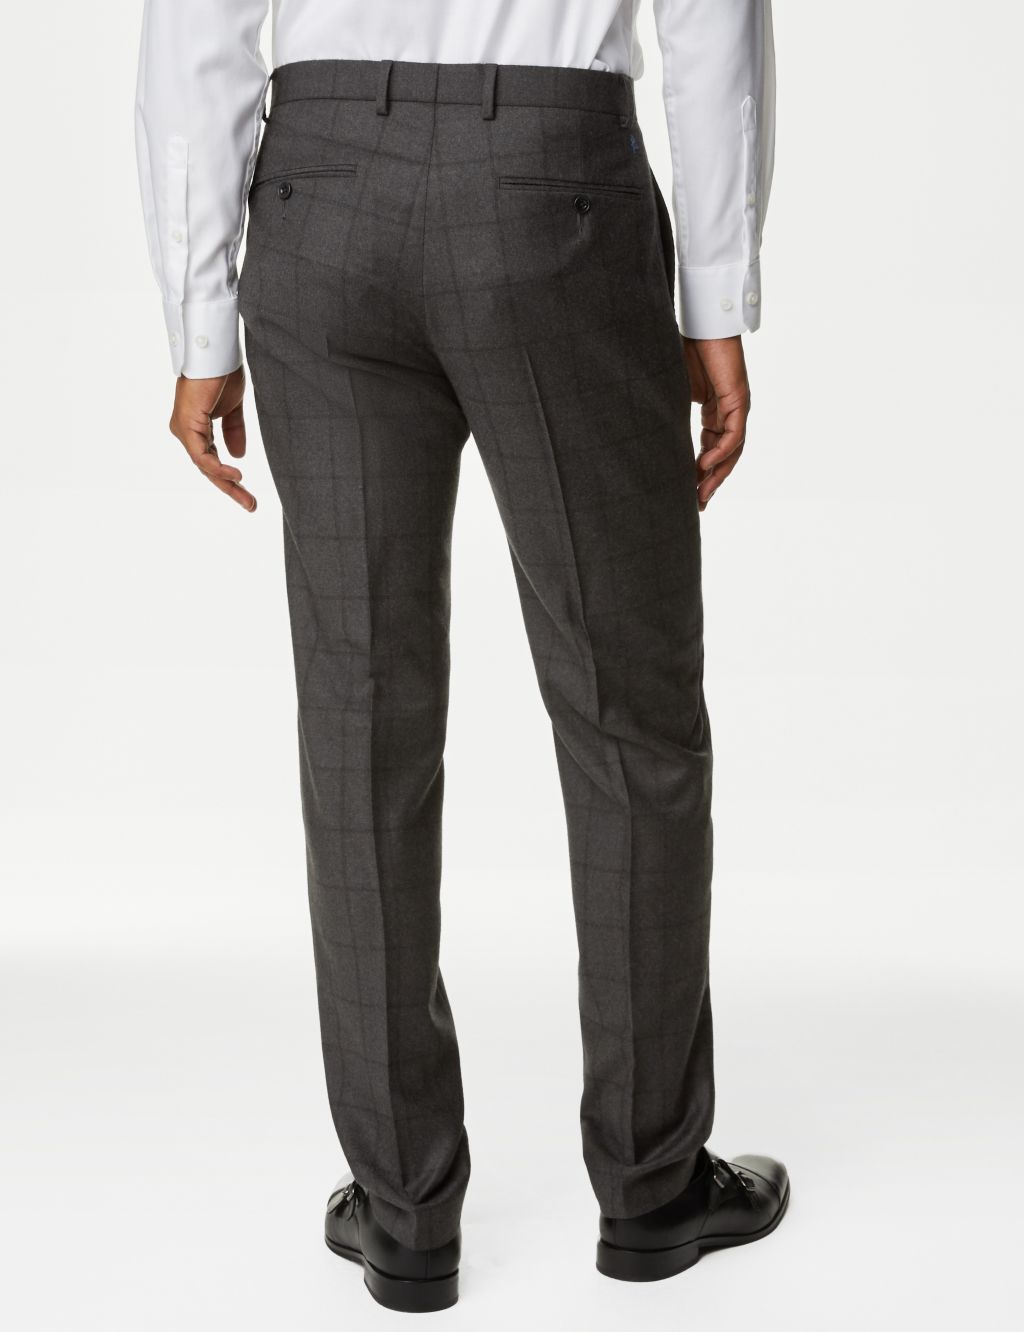 Slim Fit Pure Wool Check Suit Trousers image 4